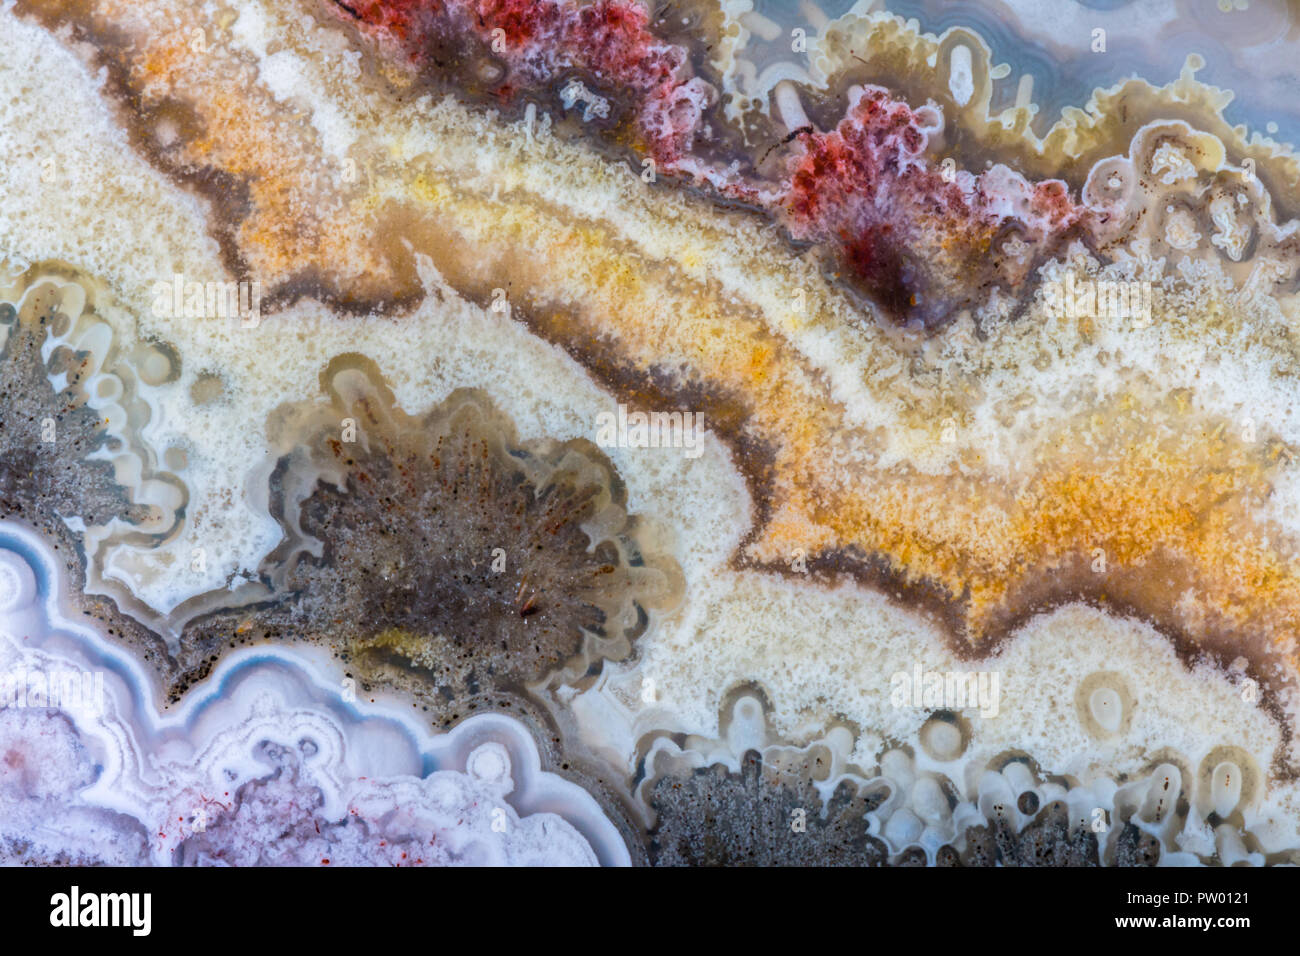 Crazy Lace Agate Stock Photo